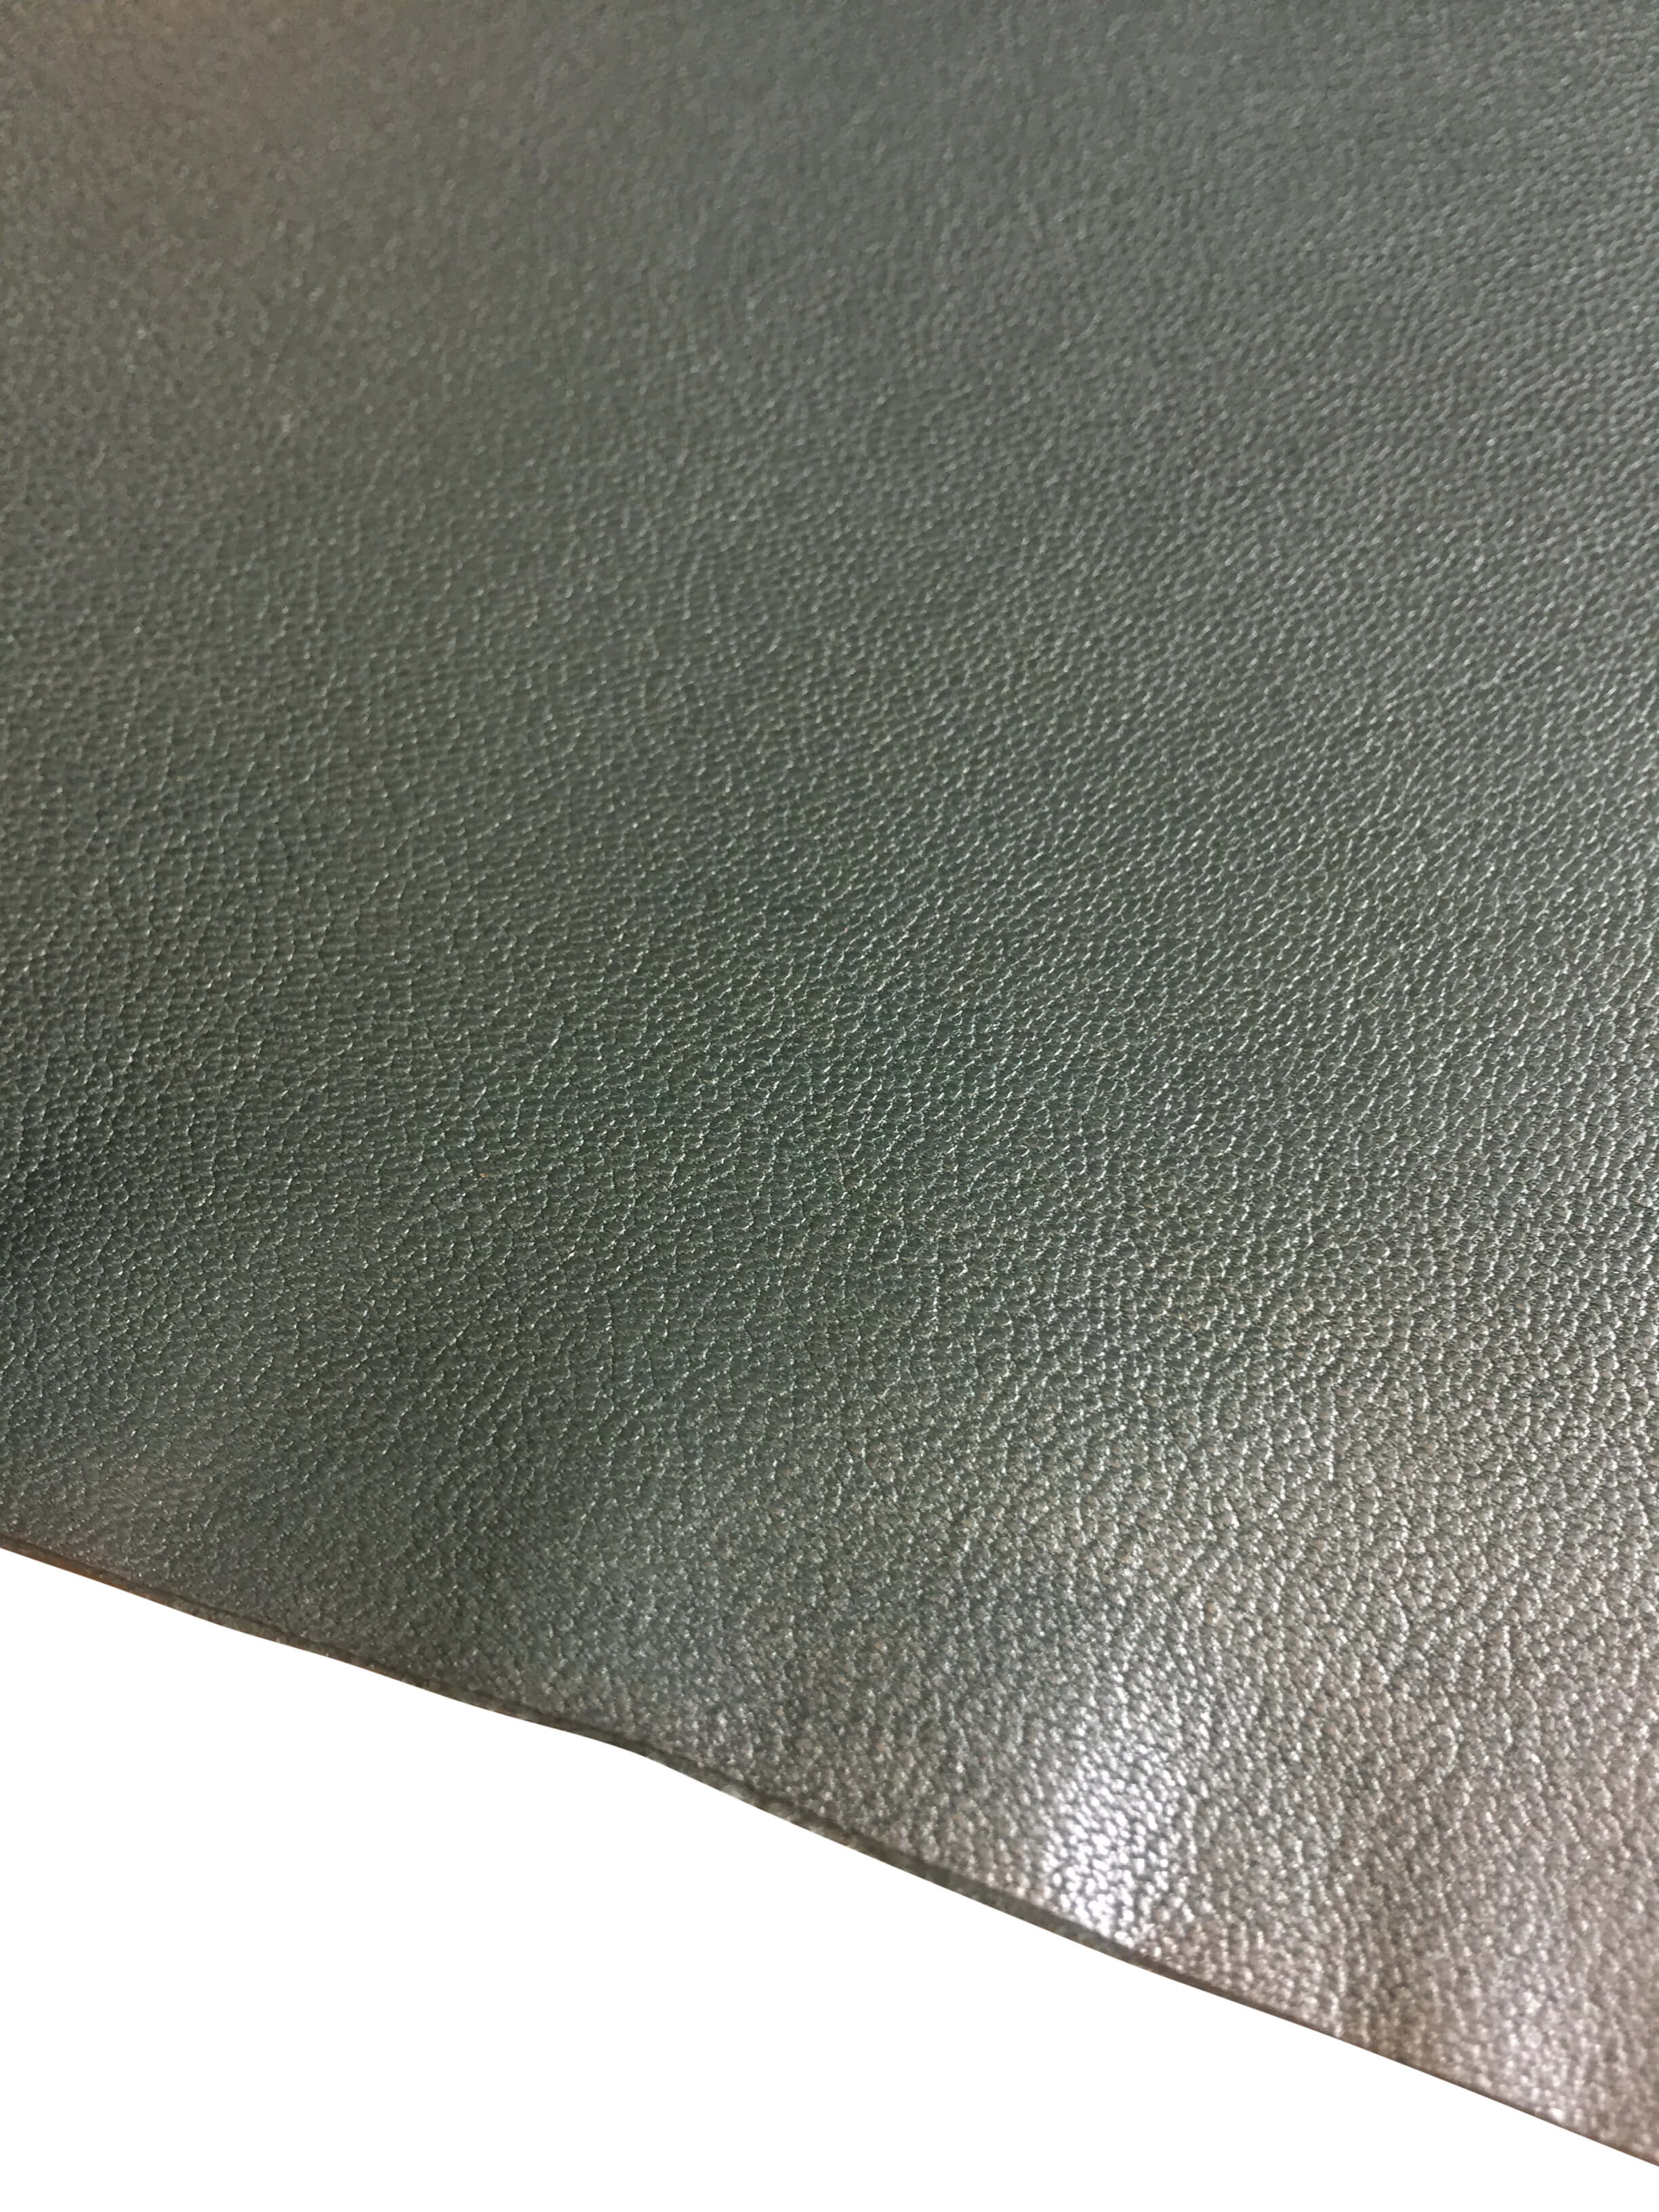 Green Blue Pebbled Leather Hides